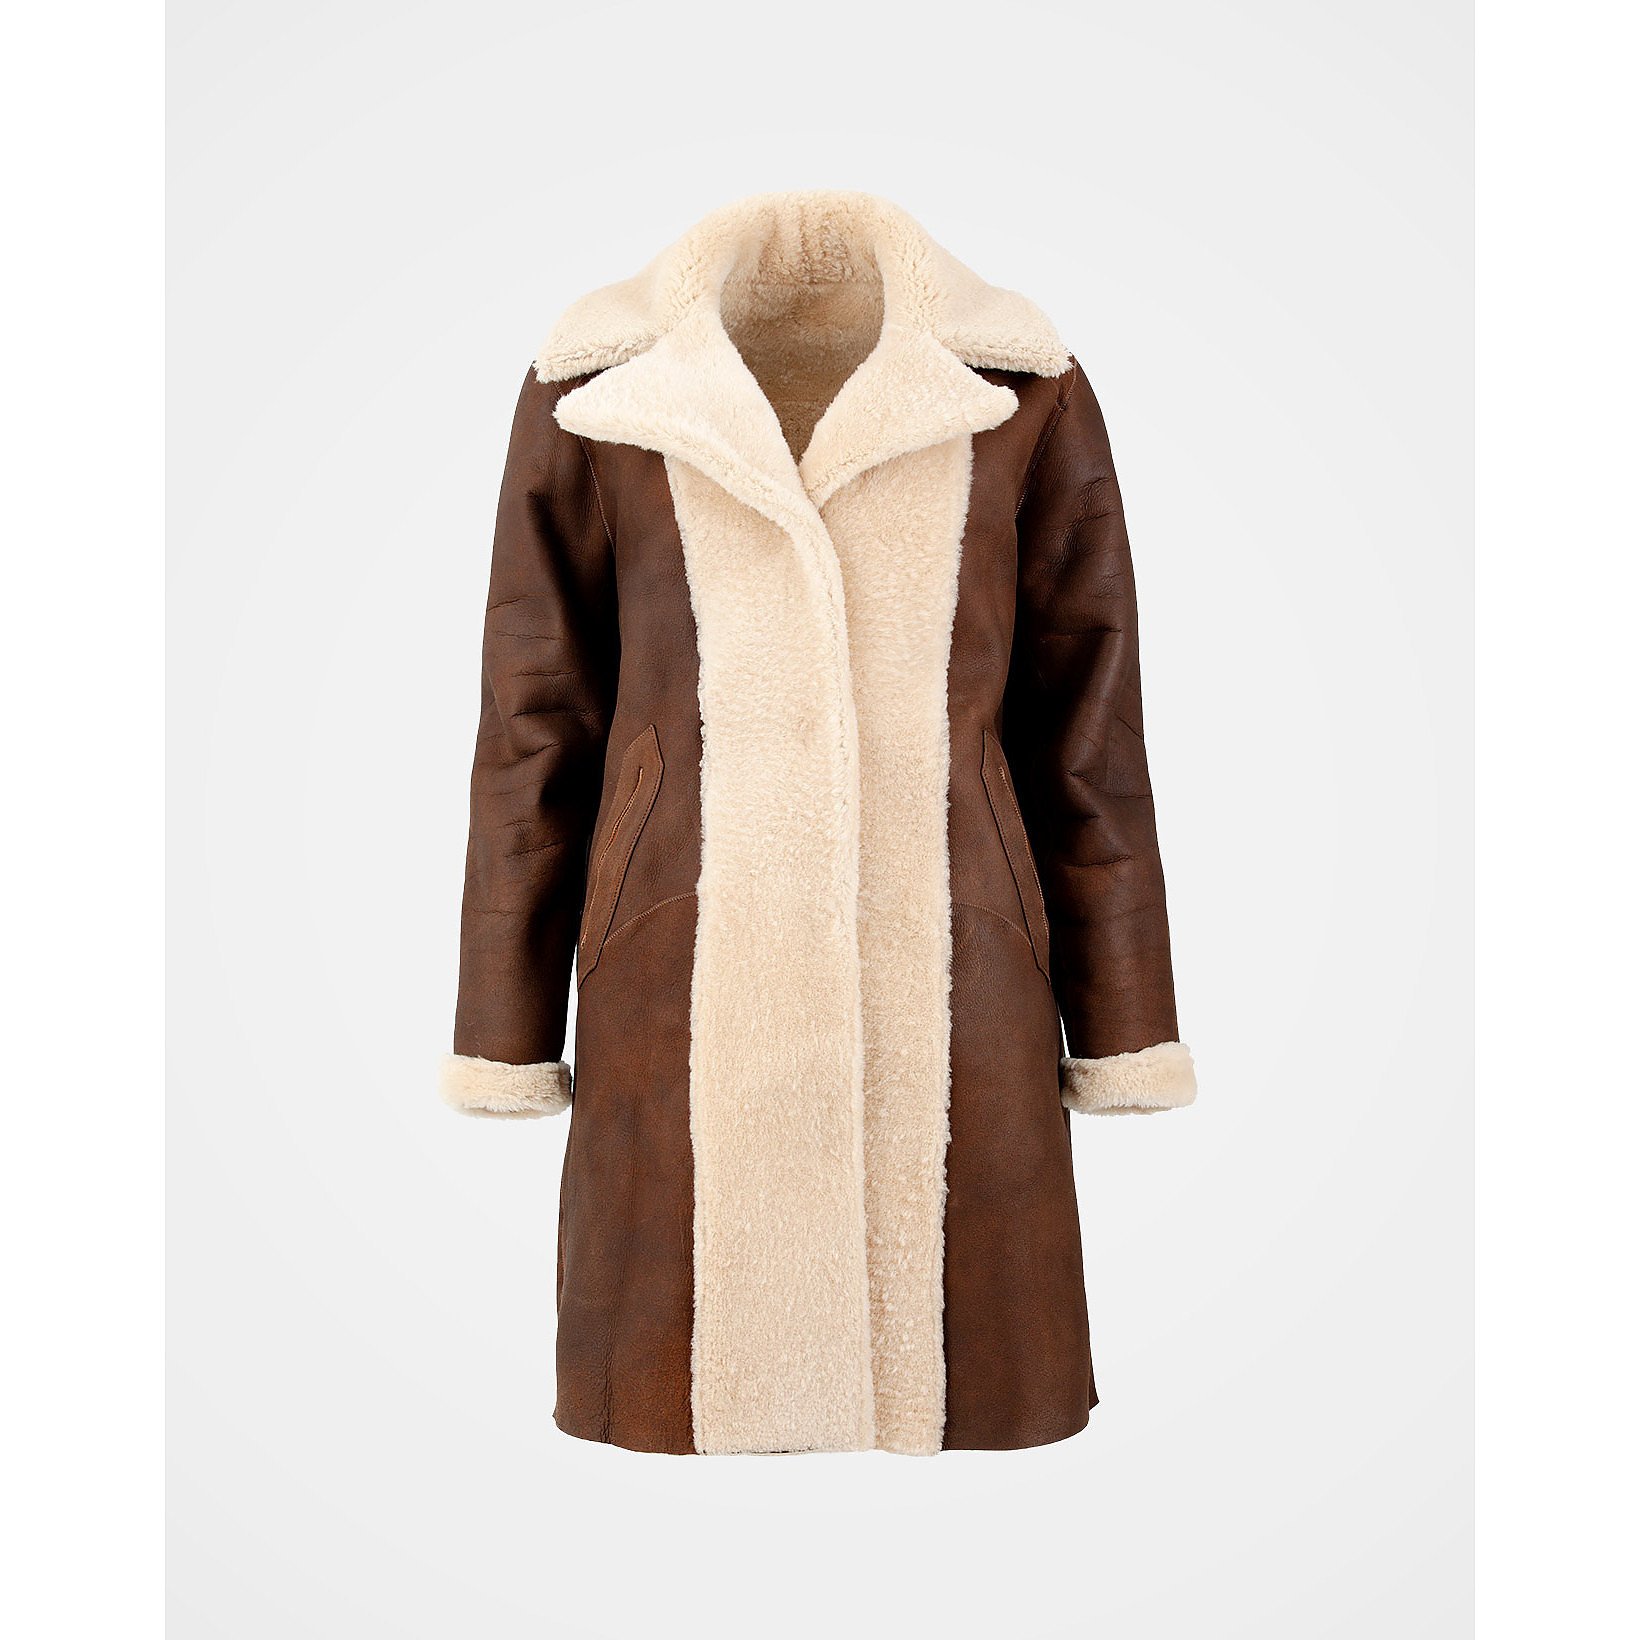 Celtic and Co Reversible Teddy Coat